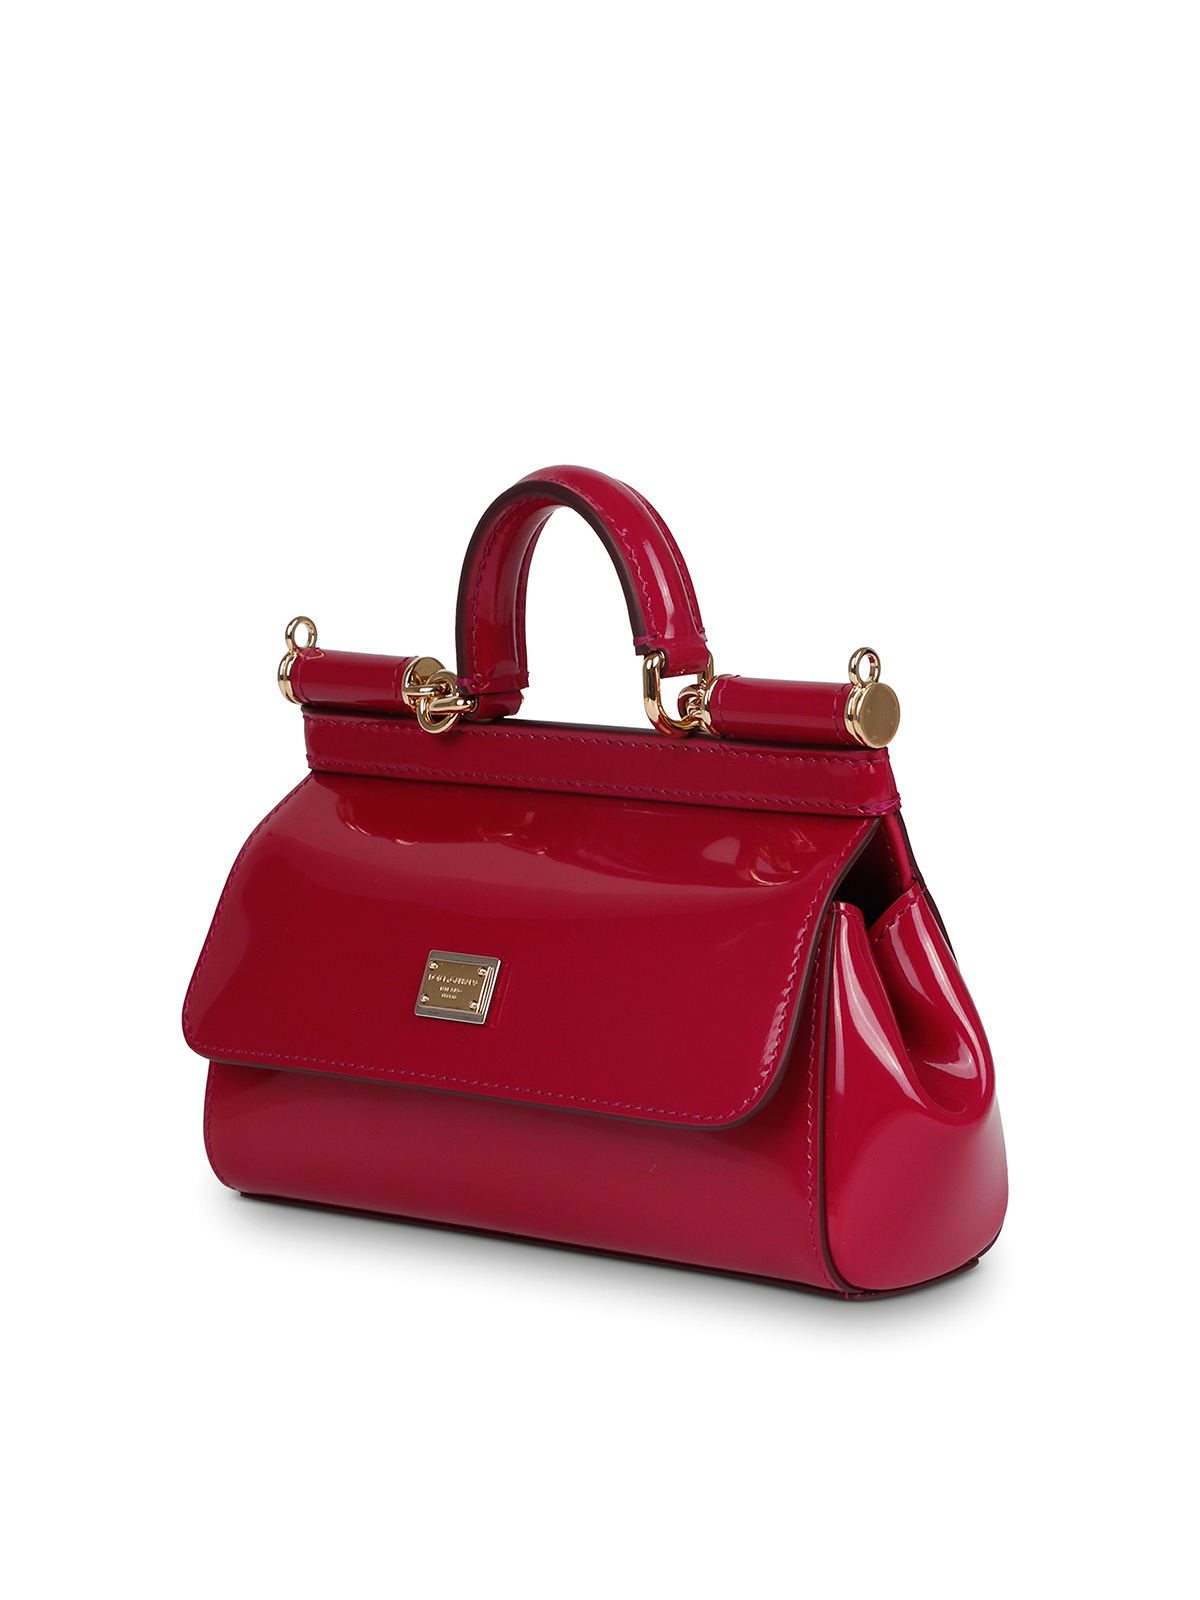 Dolce & Gabbana Sicily Small Bag in Red